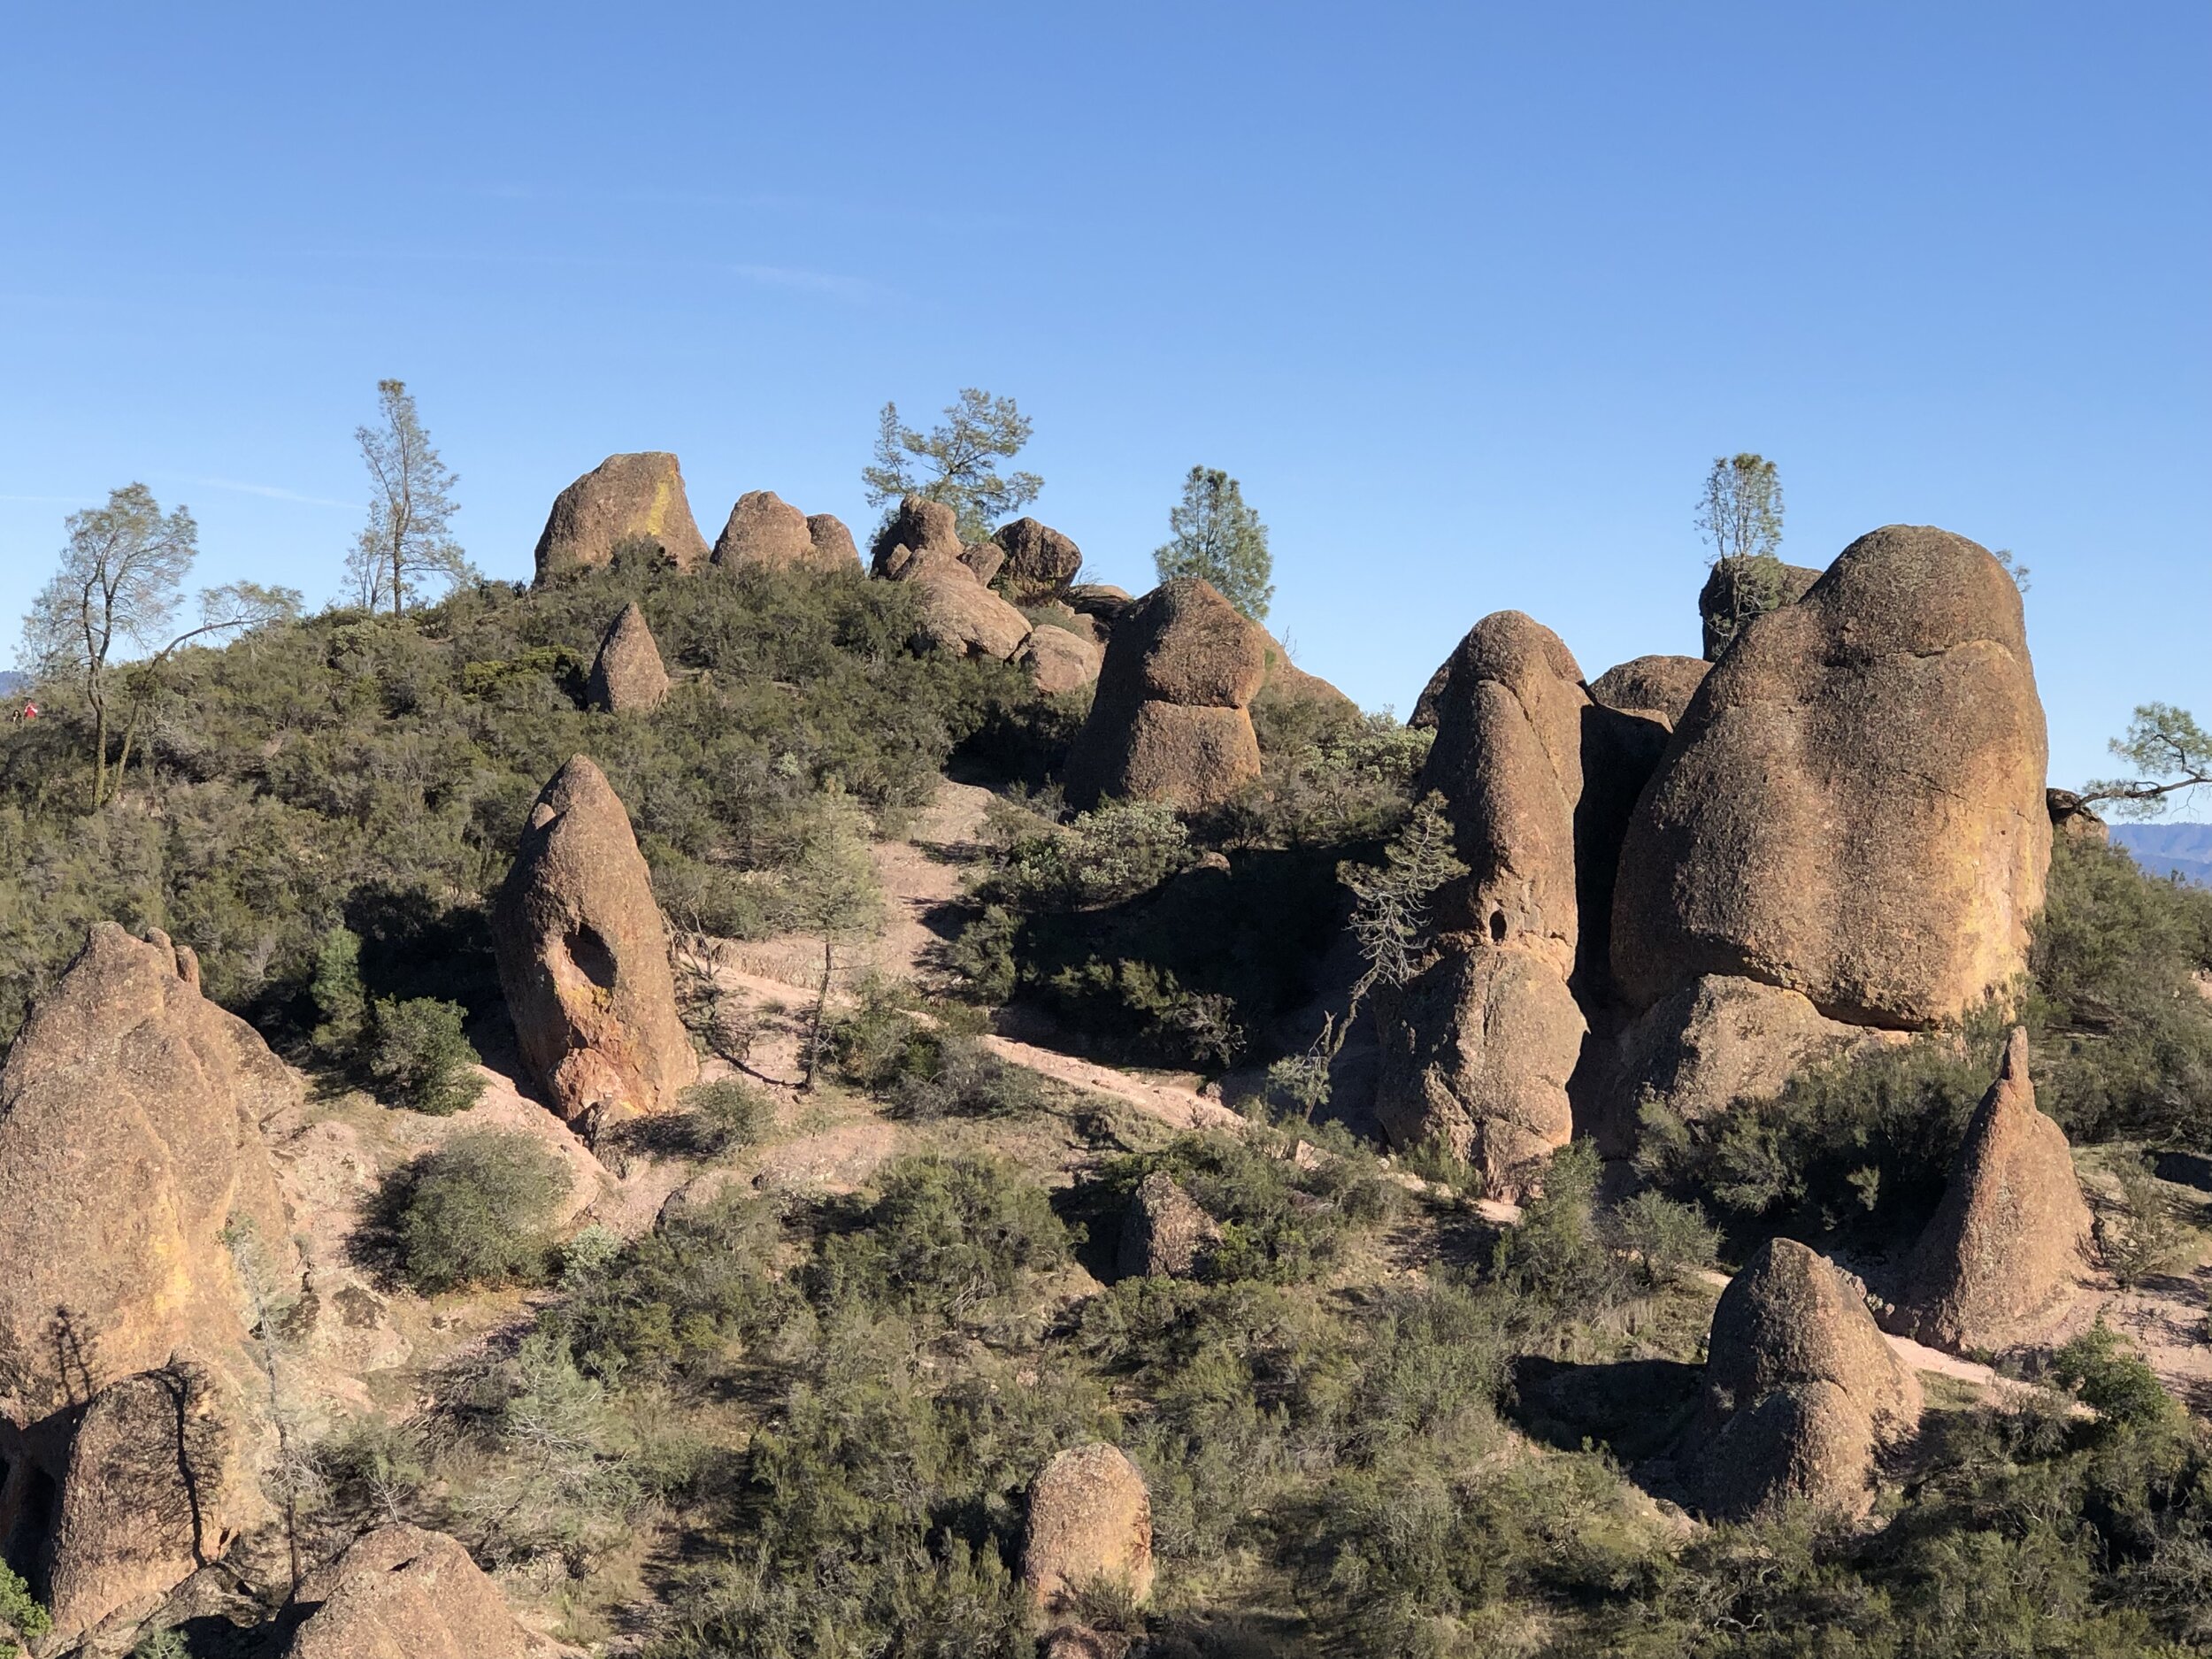 A dense network of trails winds through the park’s iconic rock spires.